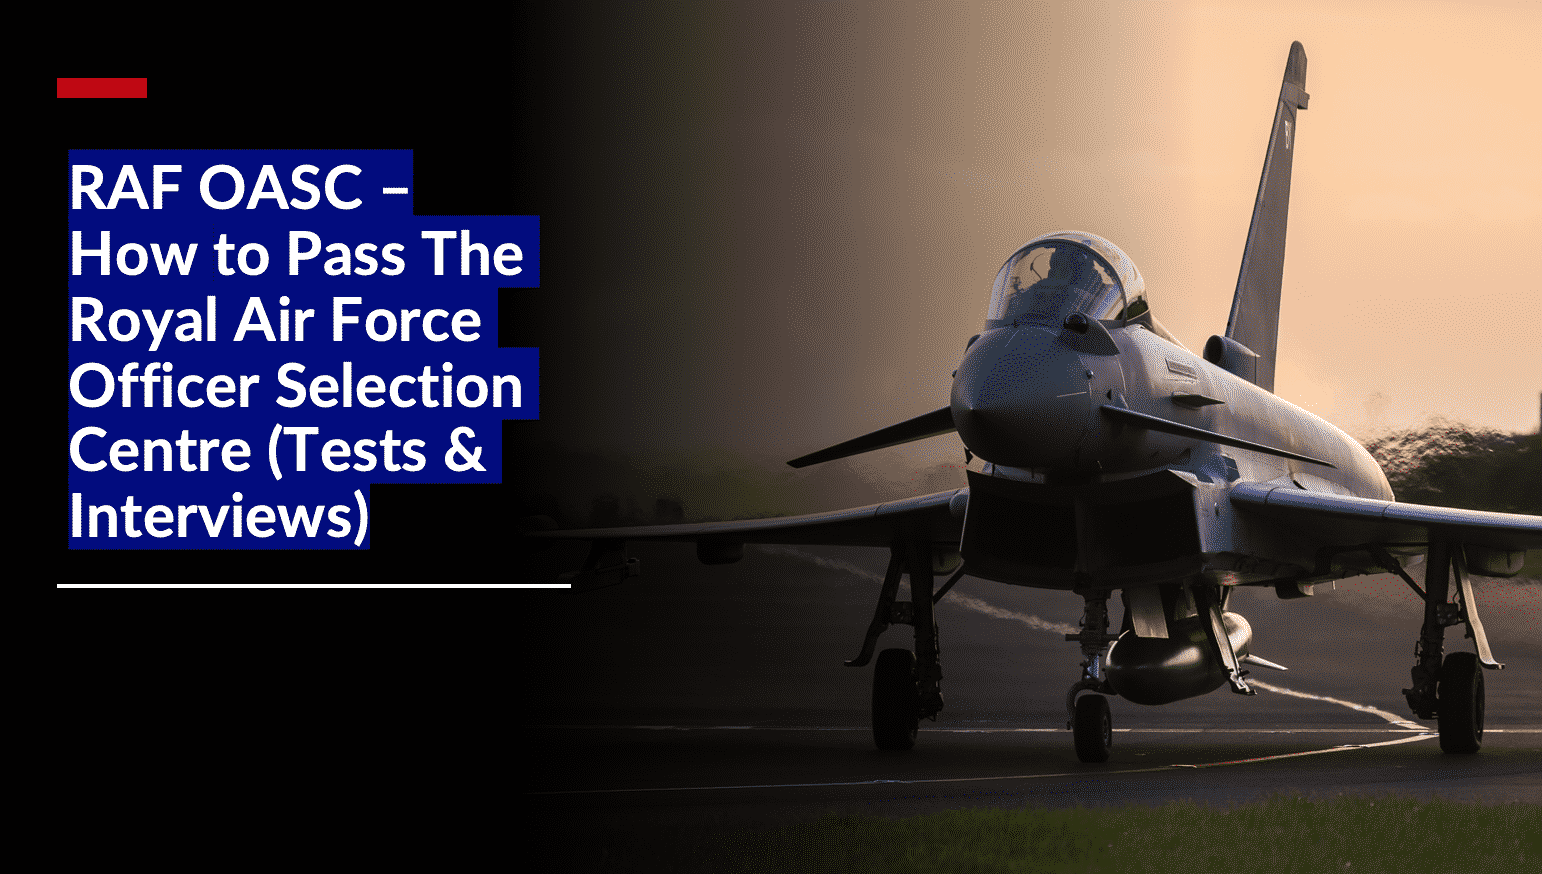 Pass The Royal Air Force Officer Selection Centre Tests & Interviews